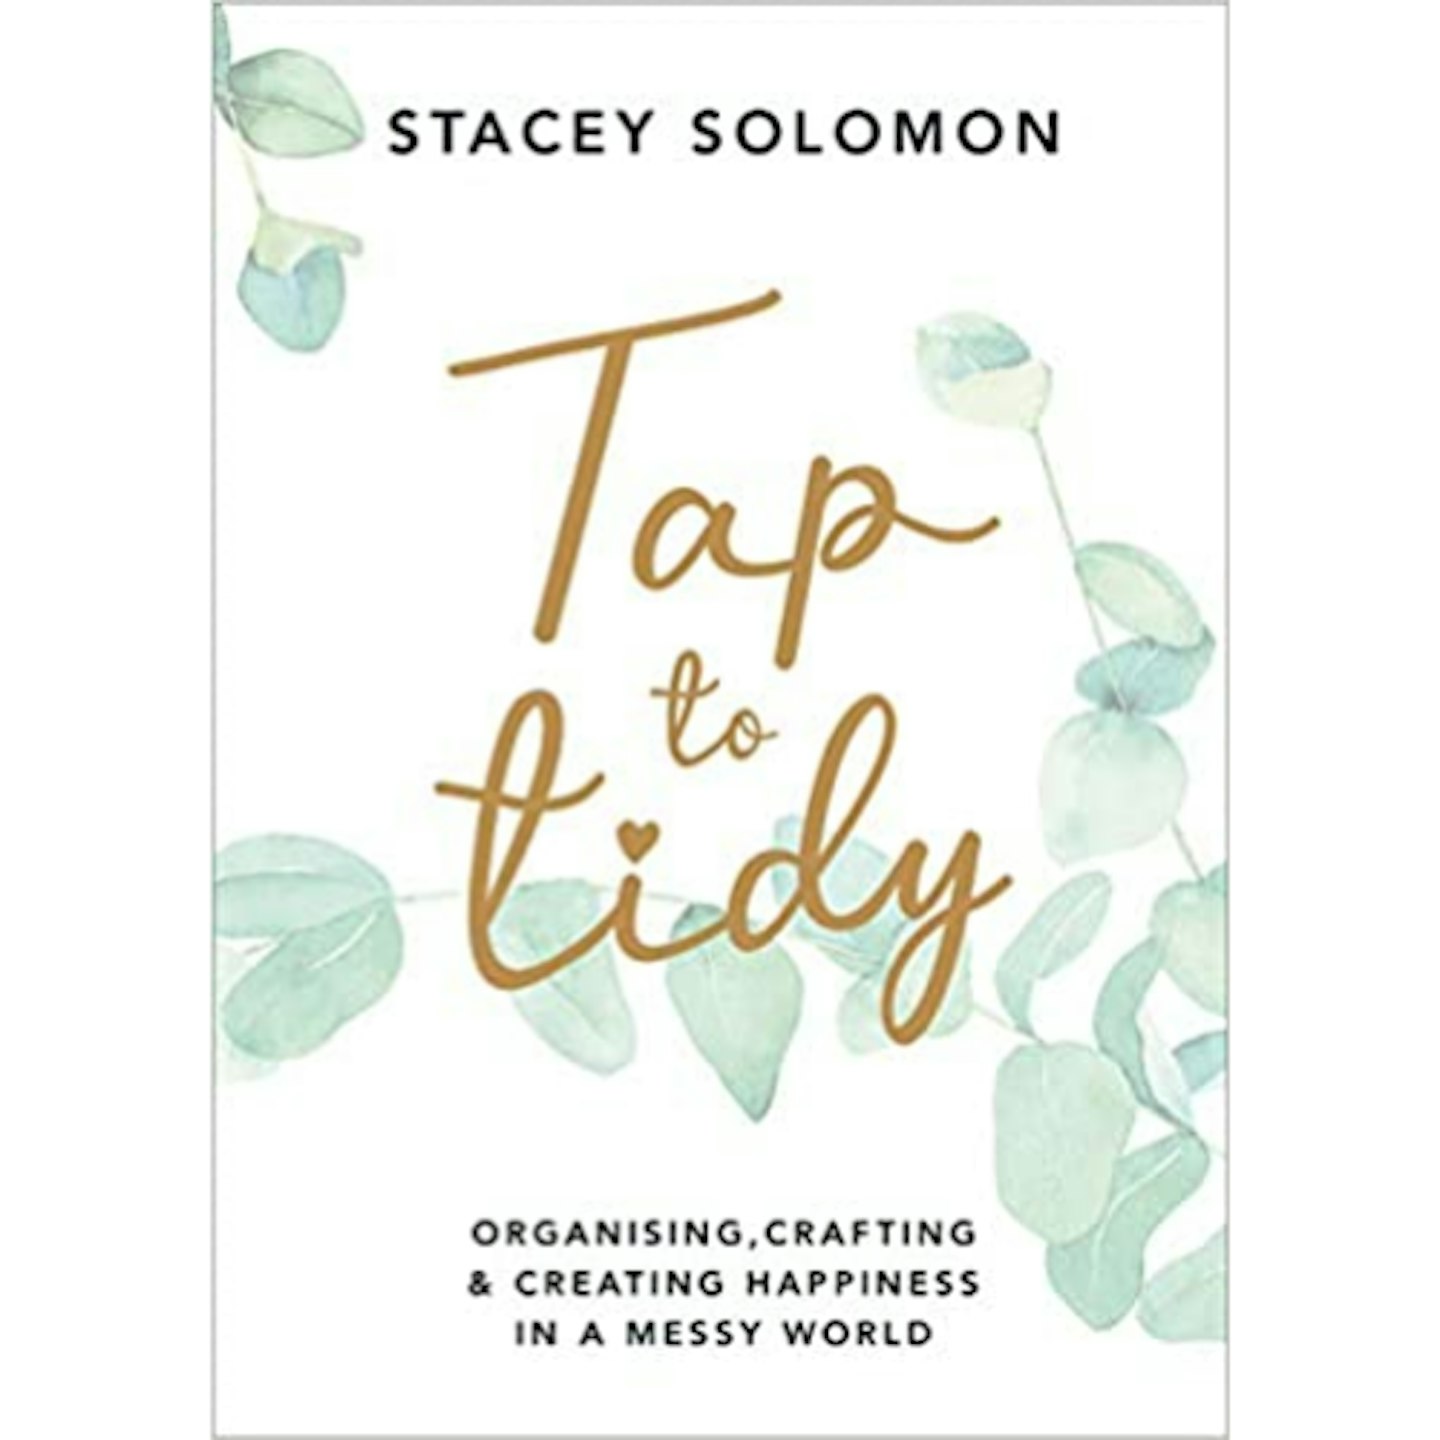 Tap to Tidy by Stacey Solomon